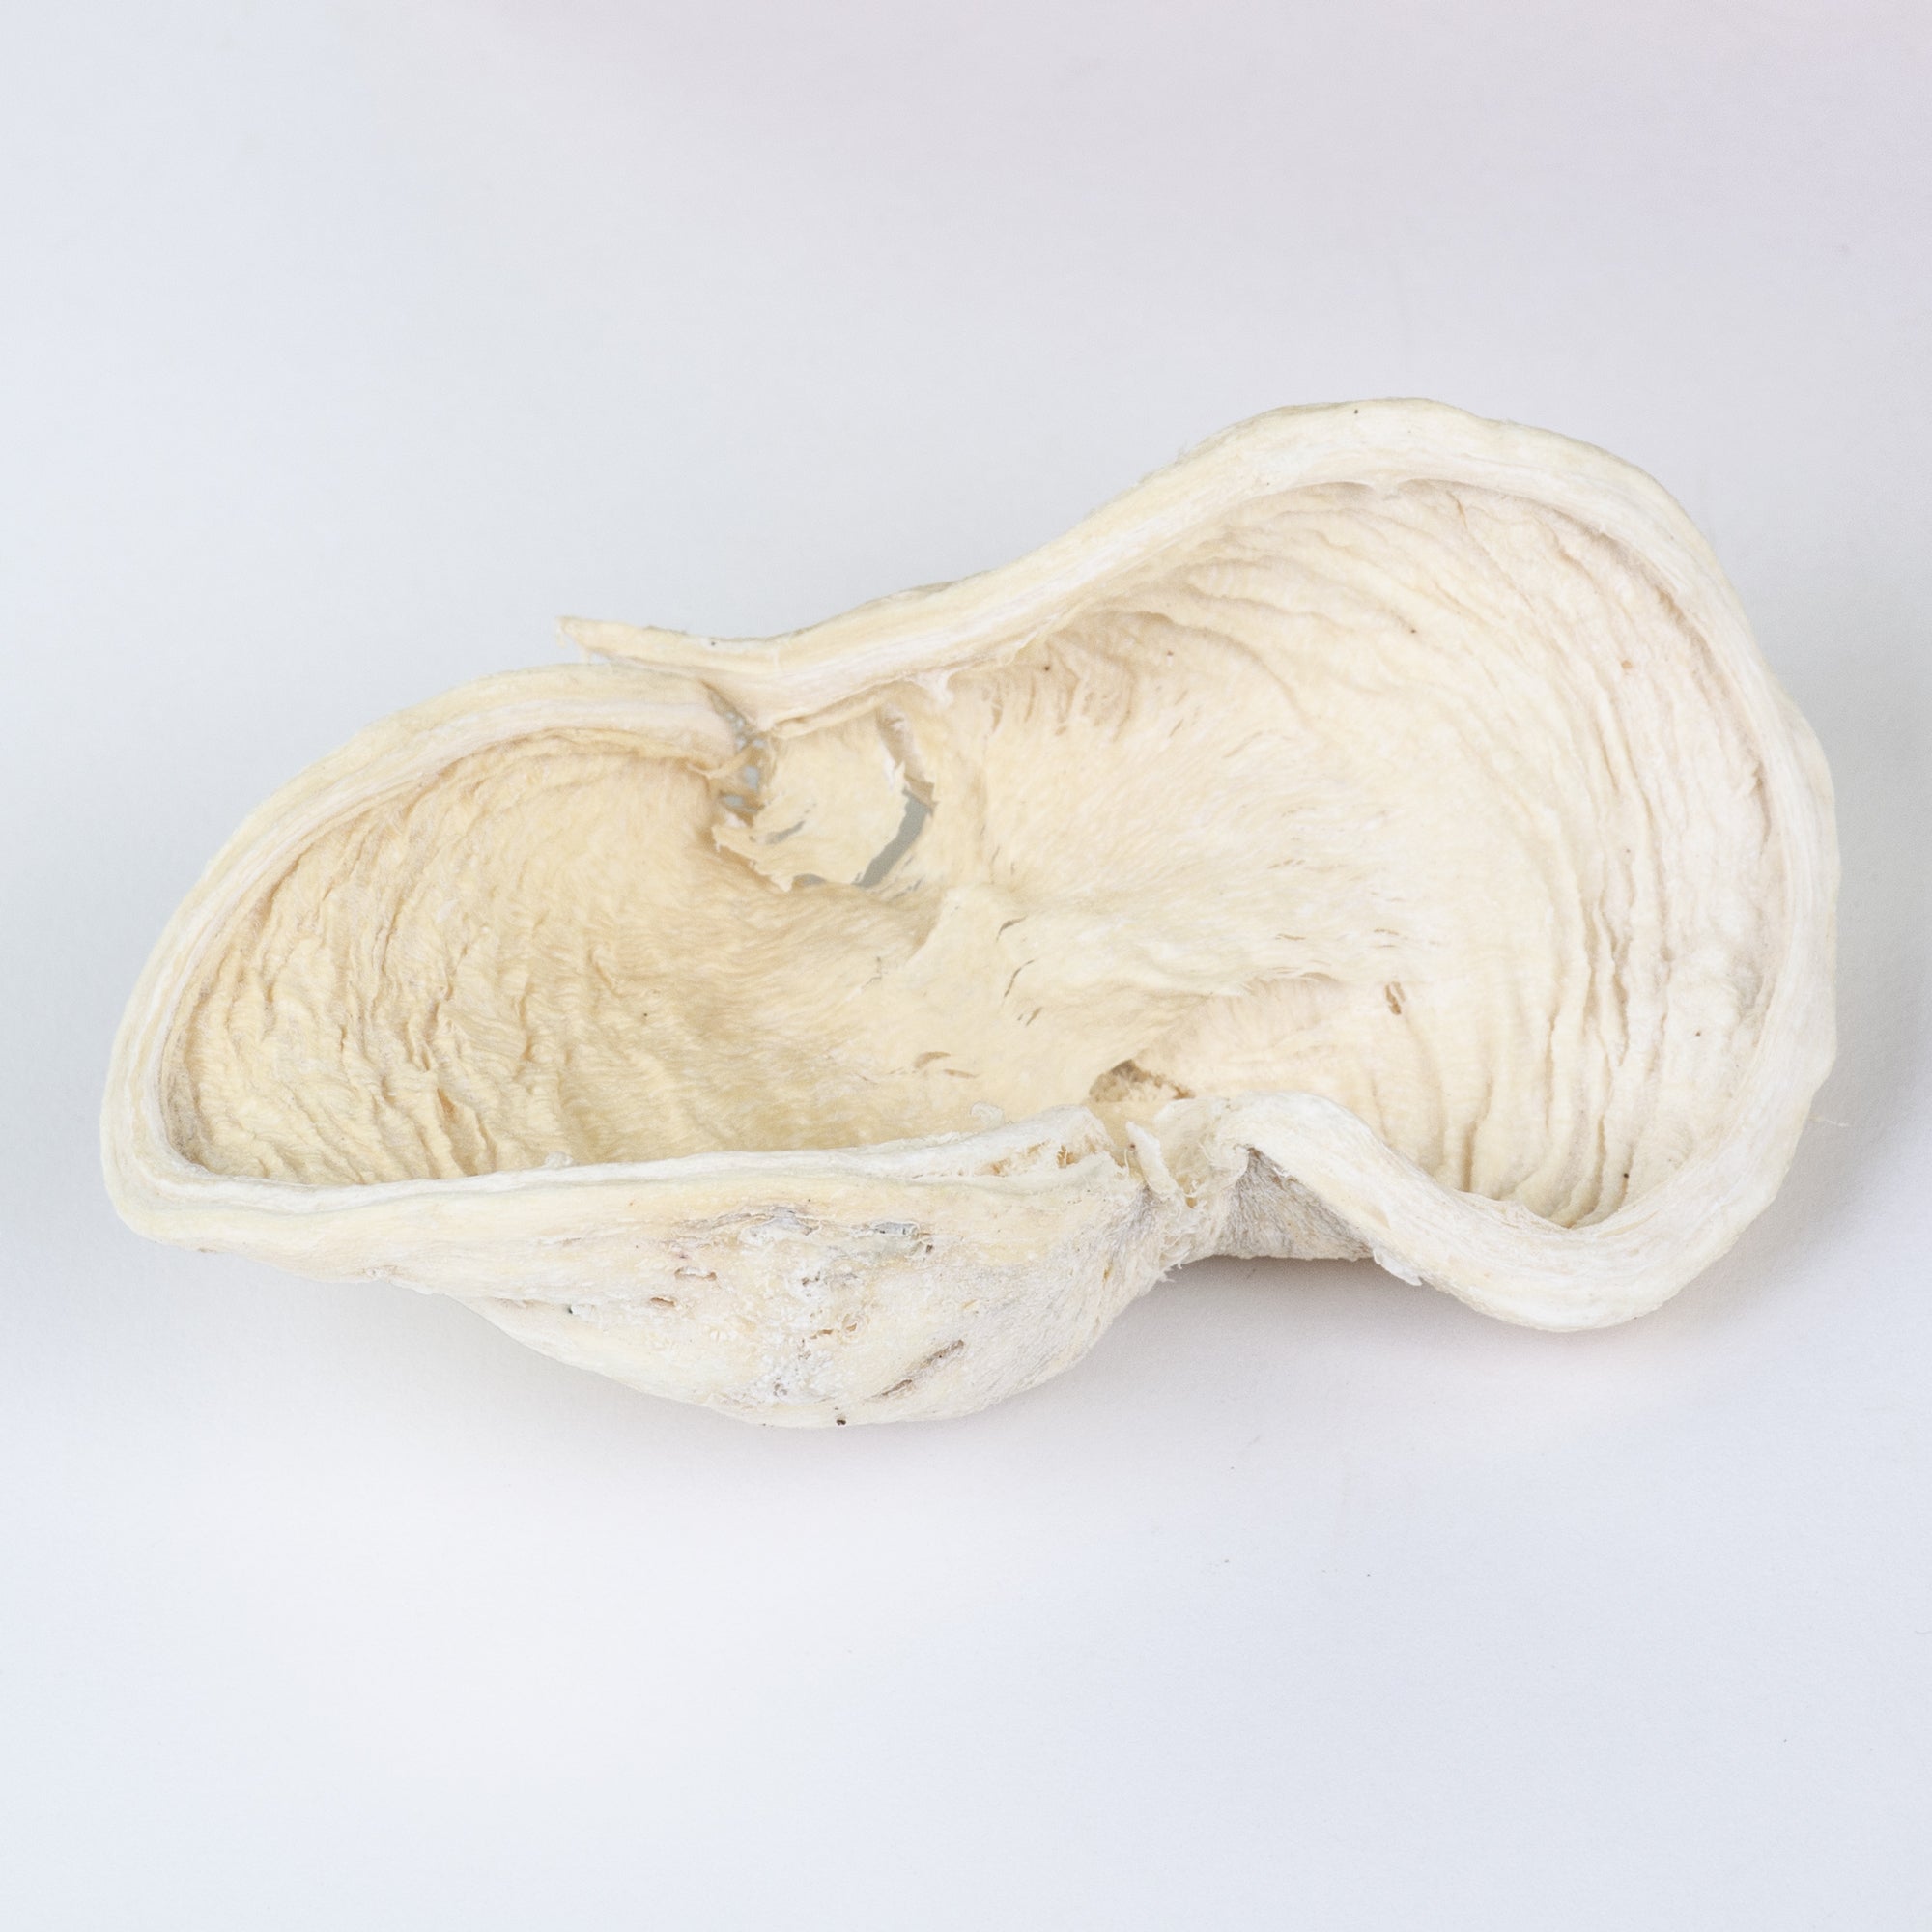 This image shows a box of bleached badam pods against a white background.